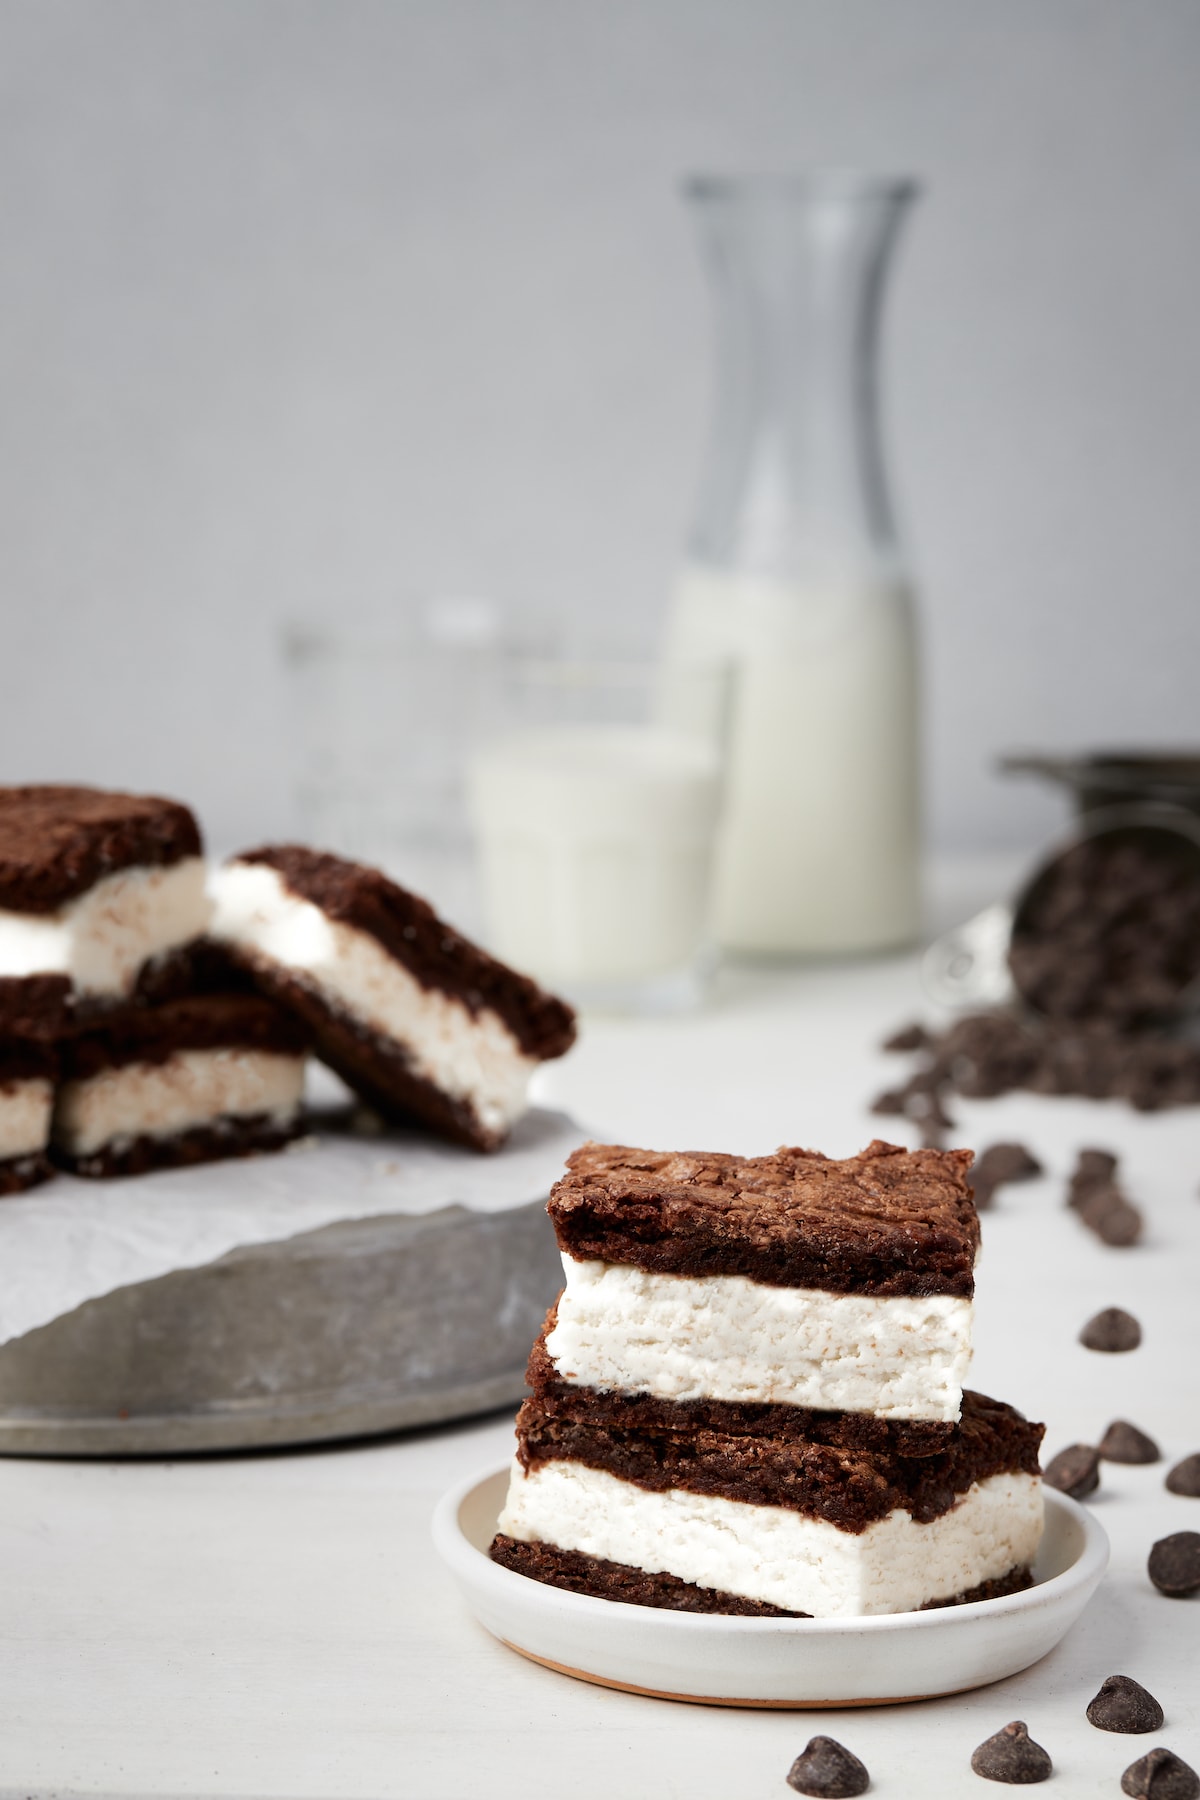 Oreo cream filled brownies with a glass of milk in the background.